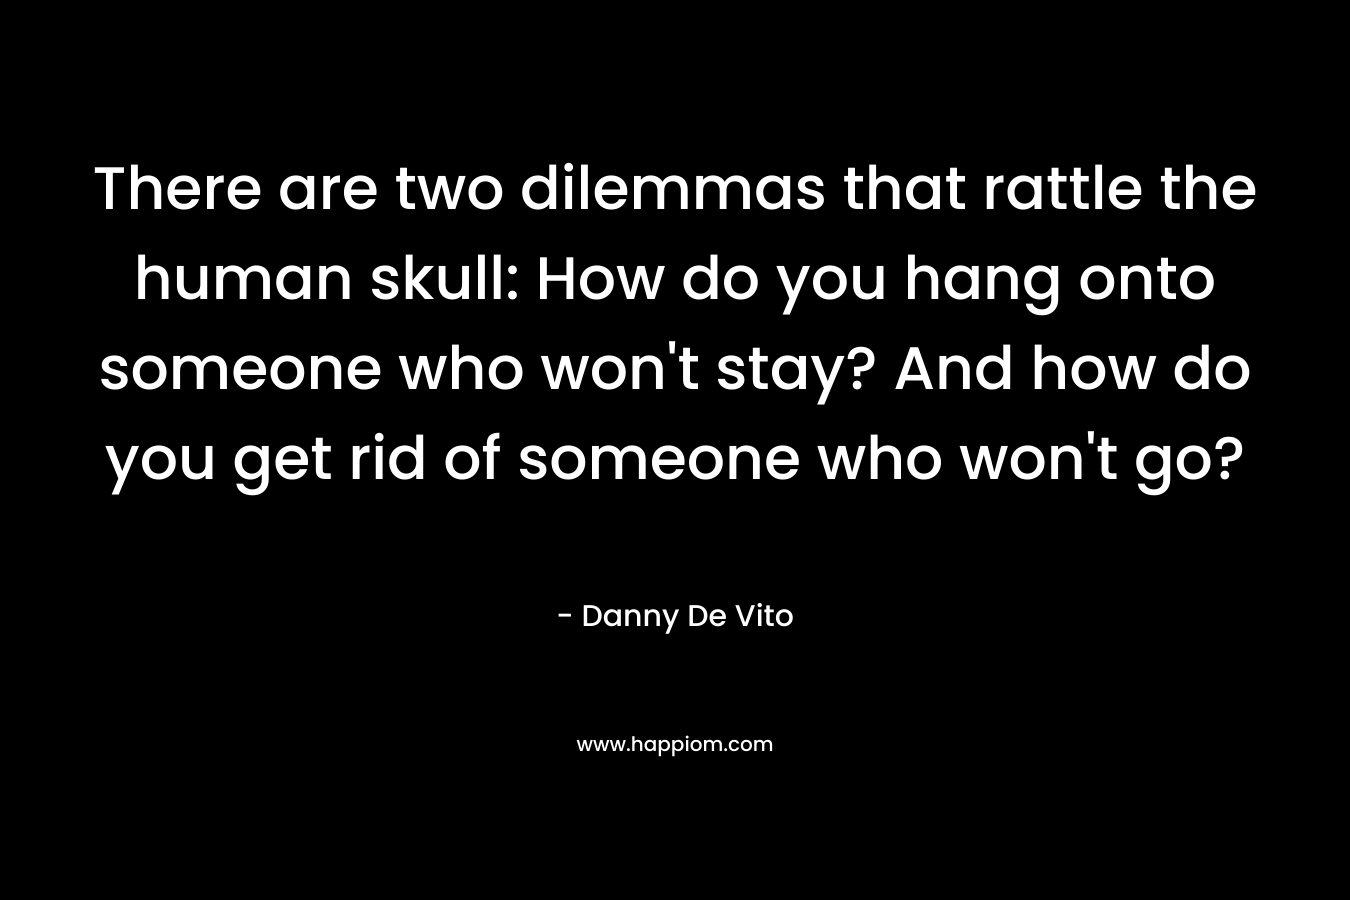 There are two dilemmas that rattle the human skull: How do you hang onto someone who won’t stay? And how do you get rid of someone who won’t go? – Danny De Vito